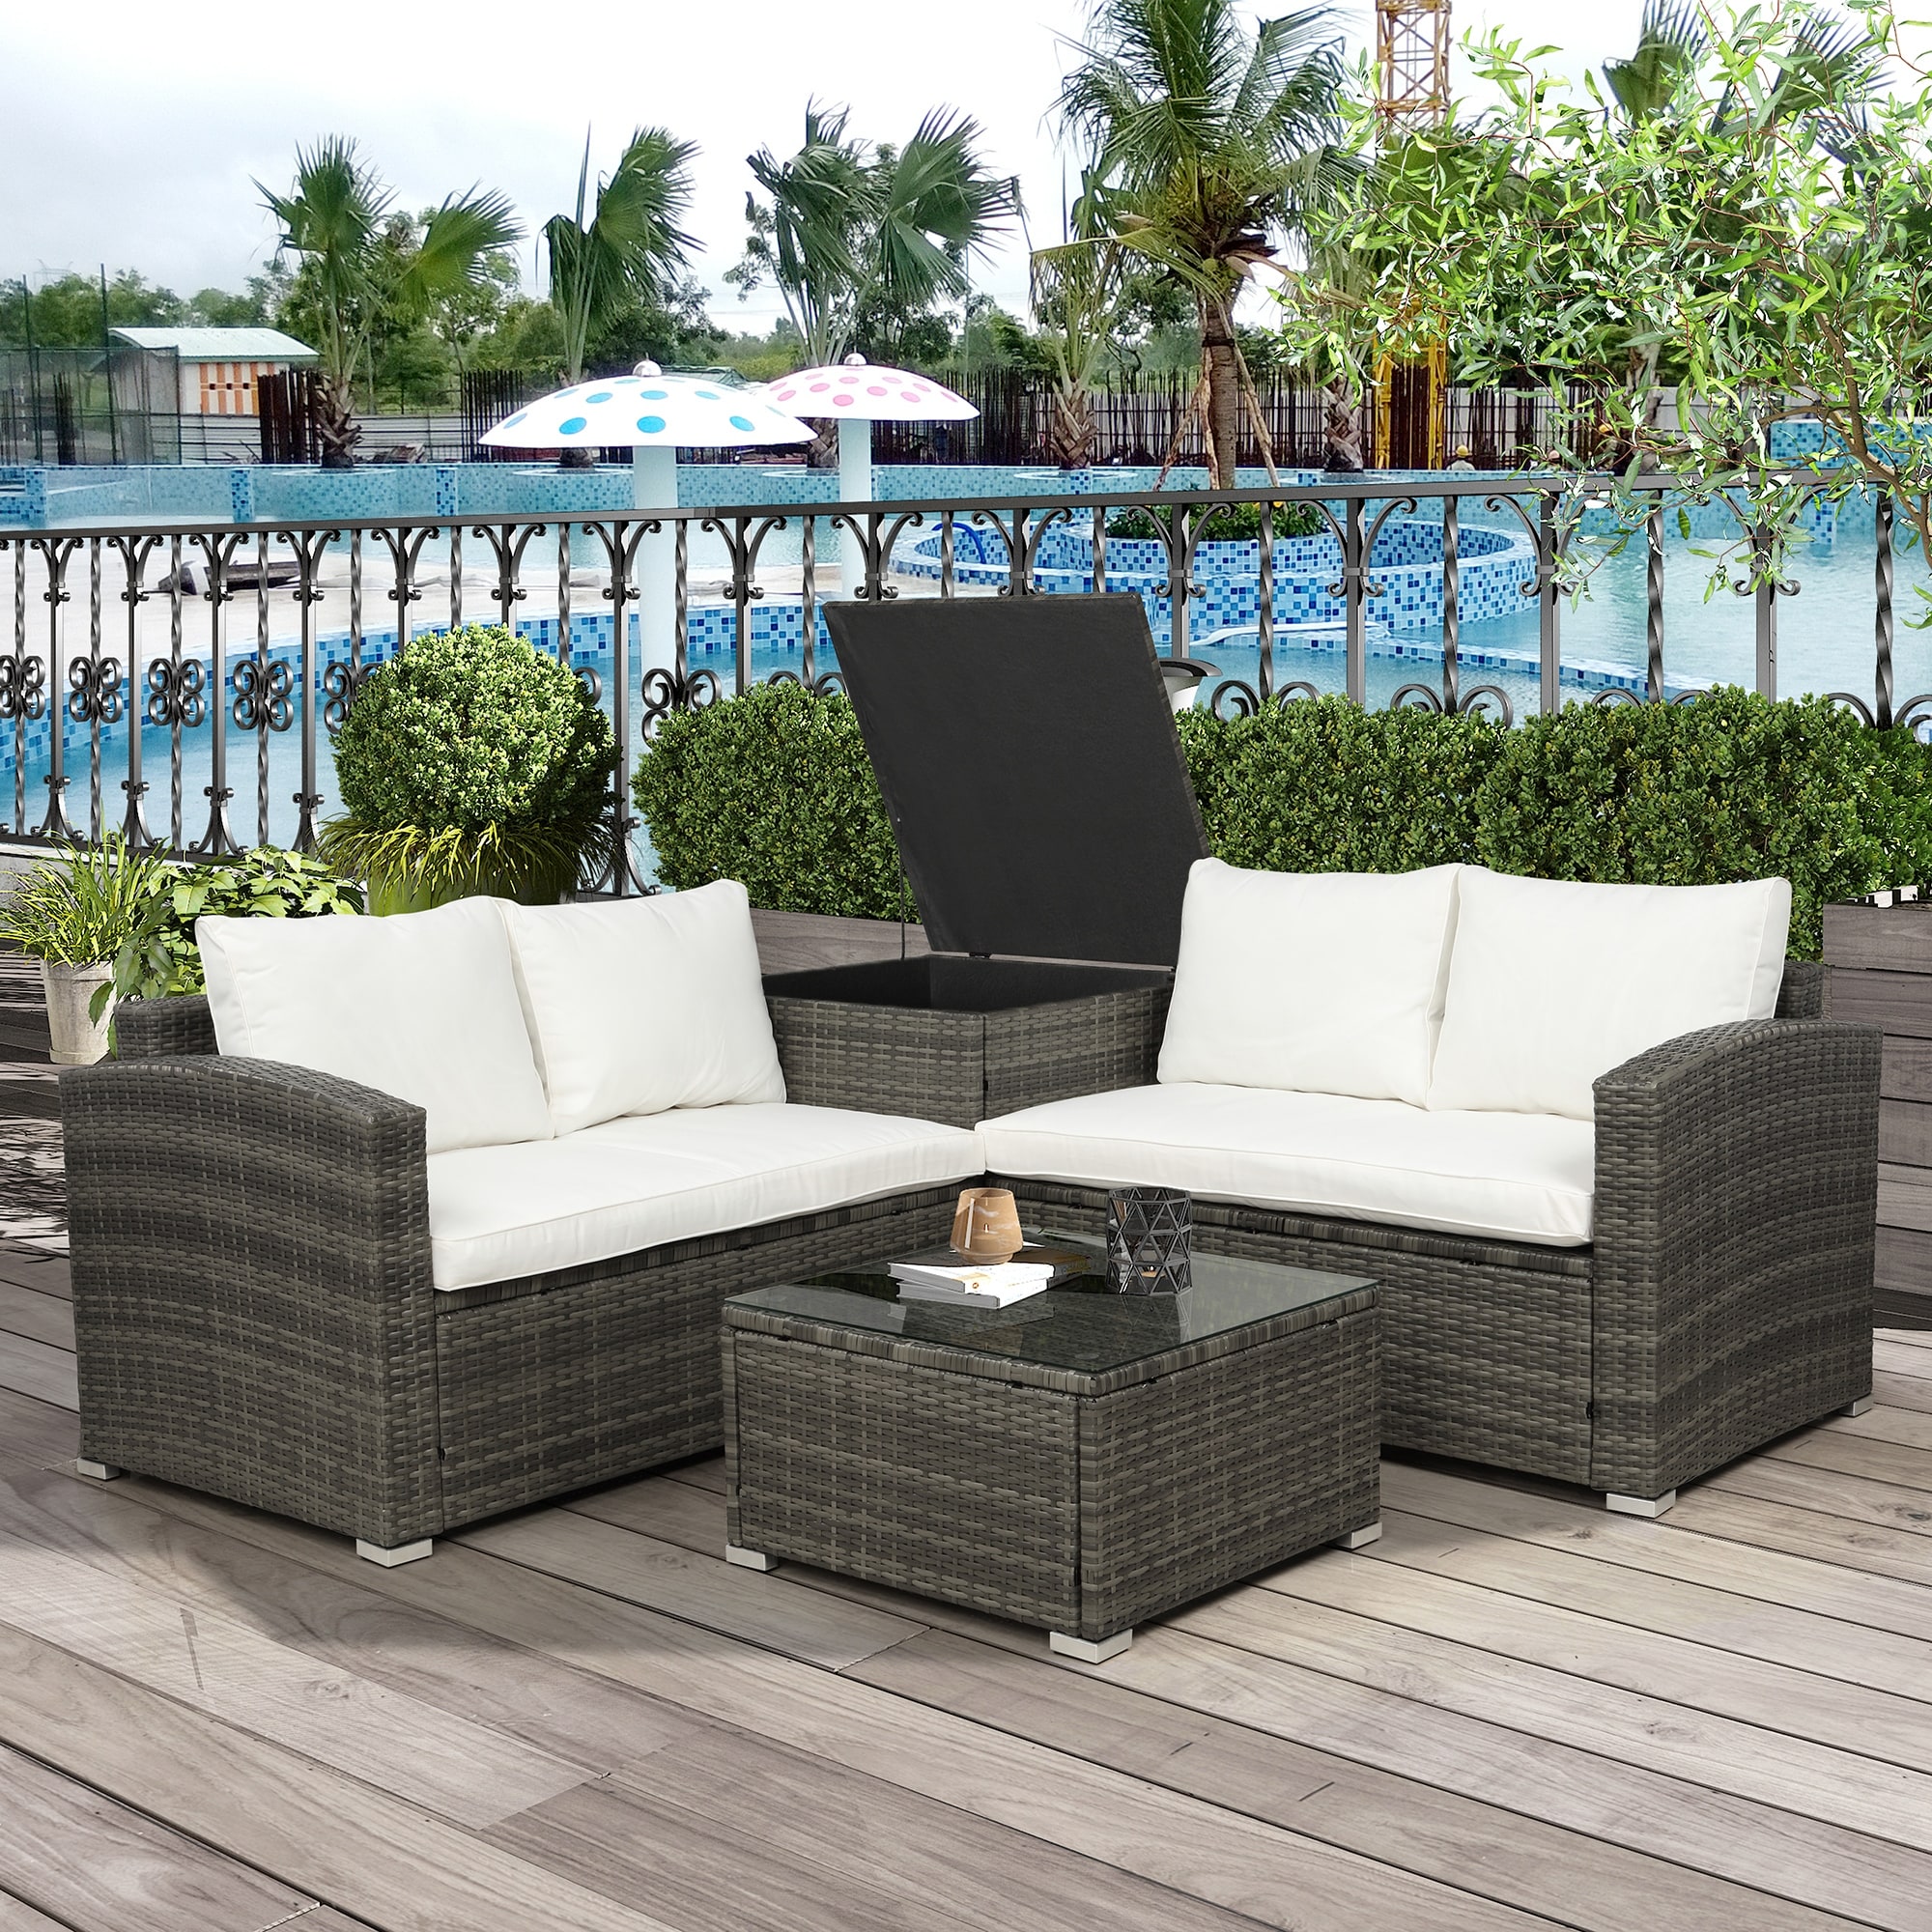 Outdoor Patio Furniture Sectional Sofa Set With Removable Cushions And Storage Box